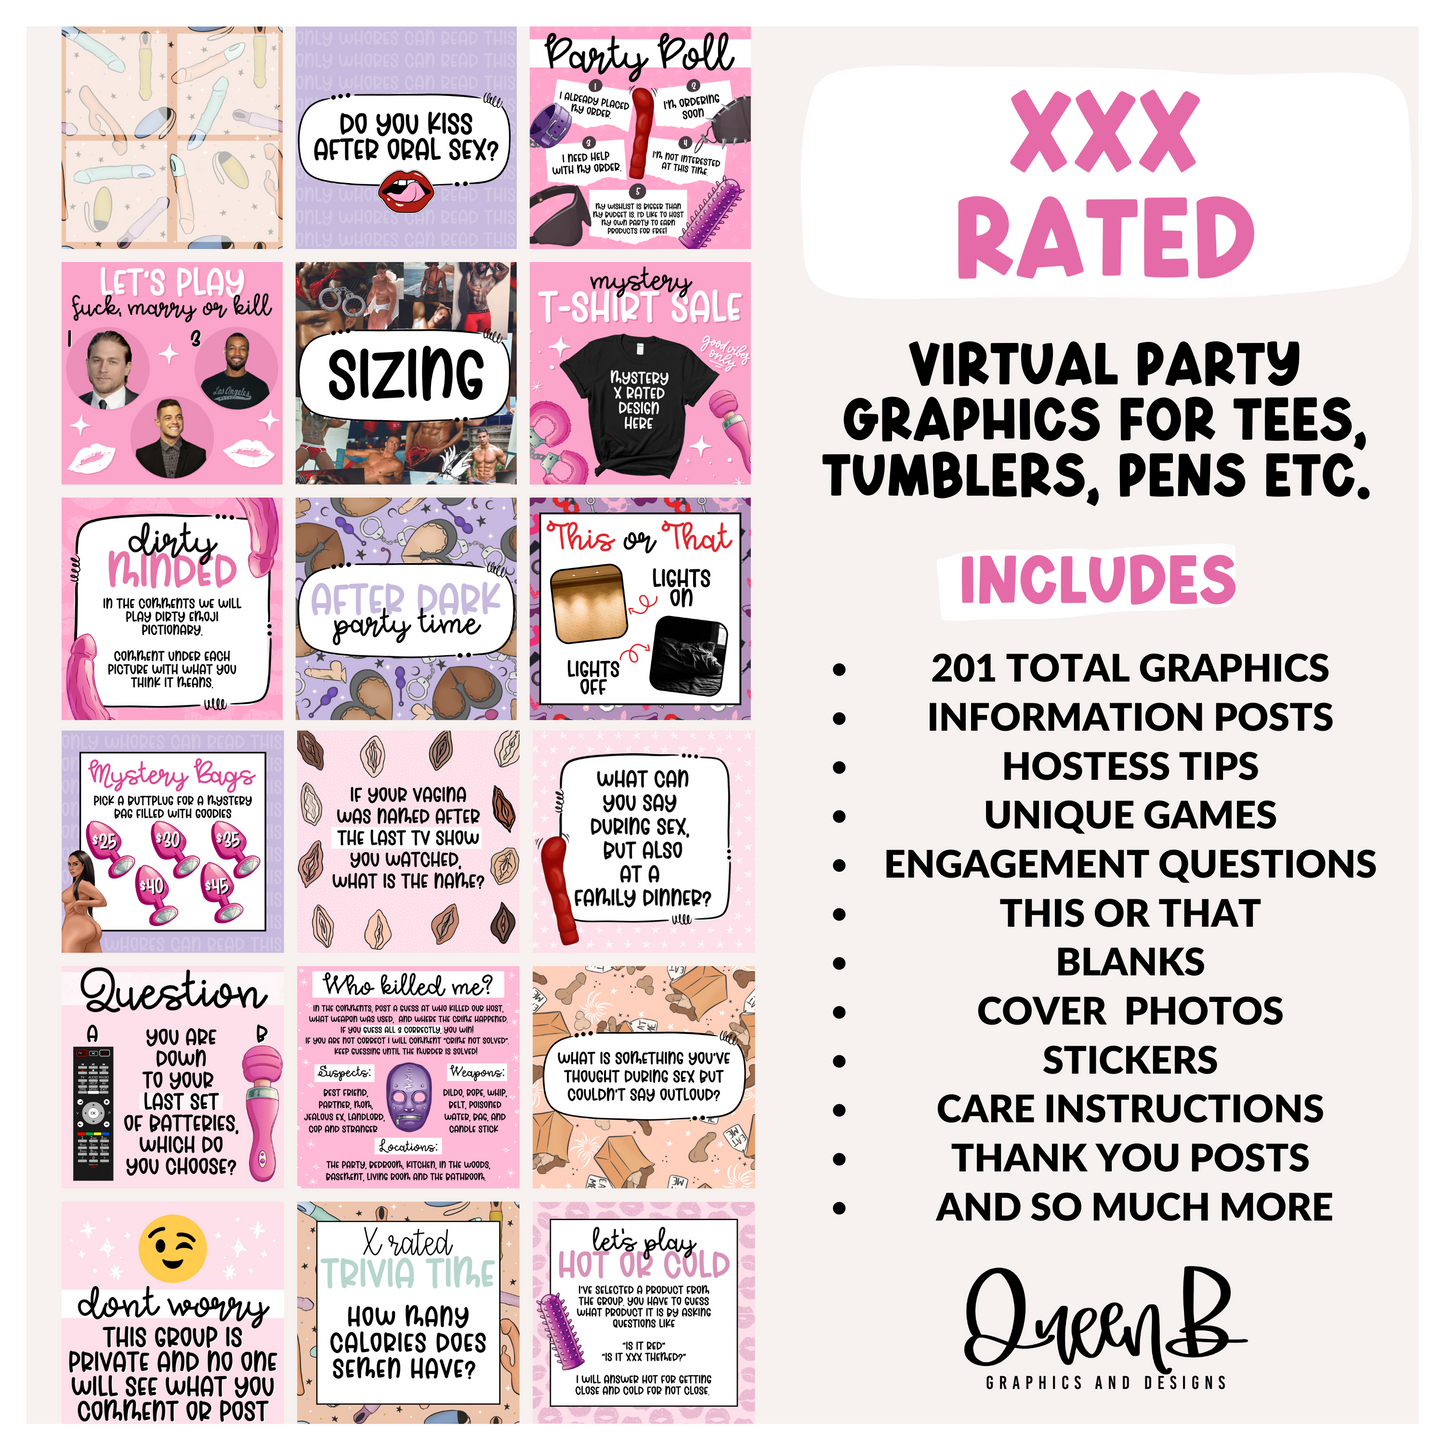 XXX Rated Tee Party & Basic Party Graphics Collection